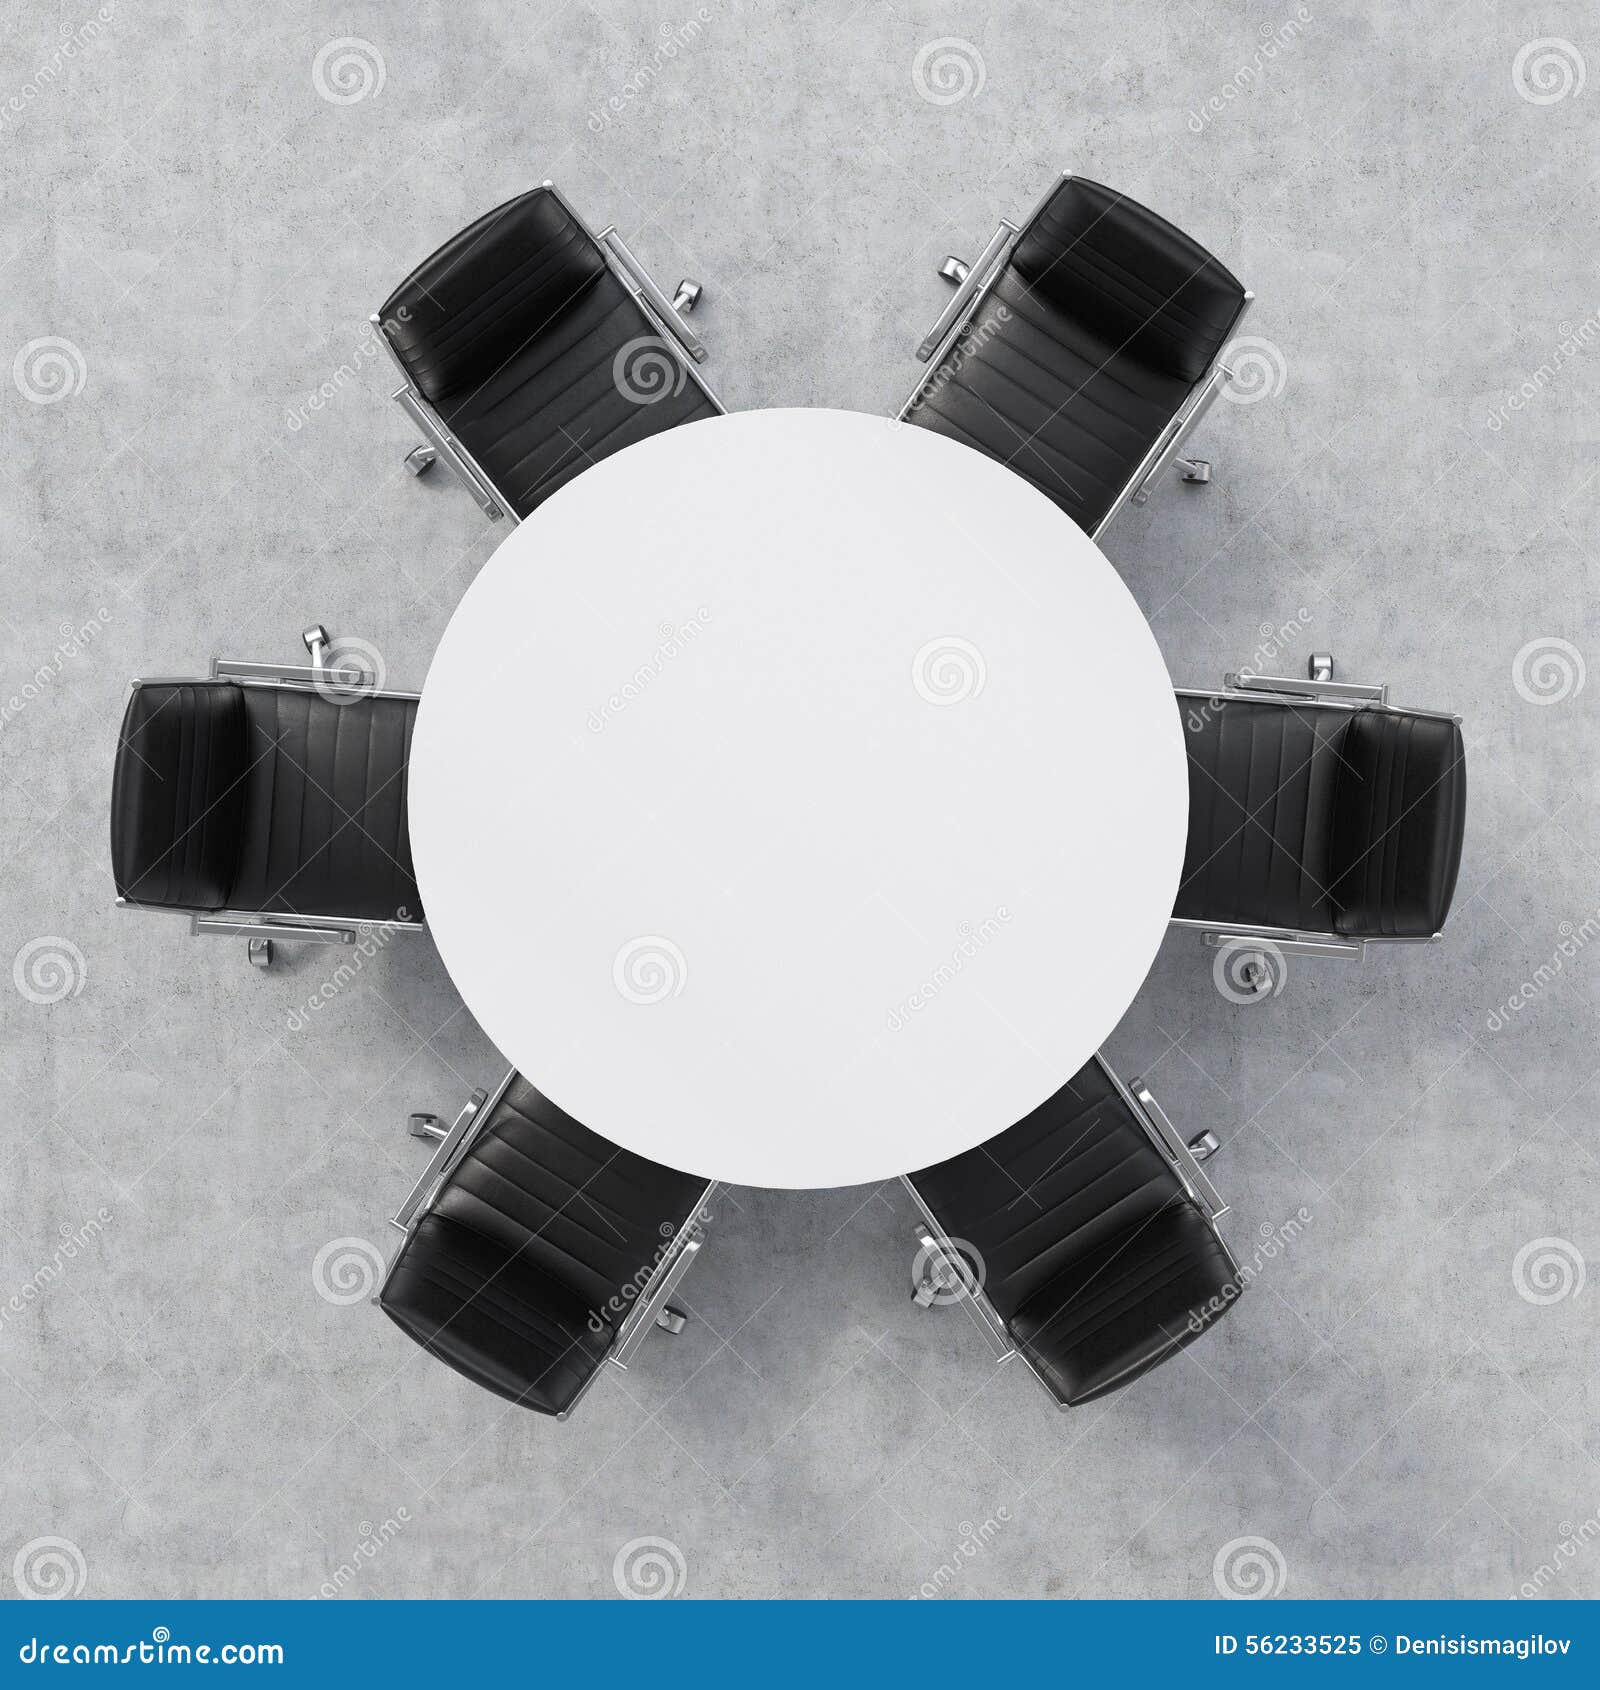 Top View Of A Conference Room A White Round Table And Six Chairs